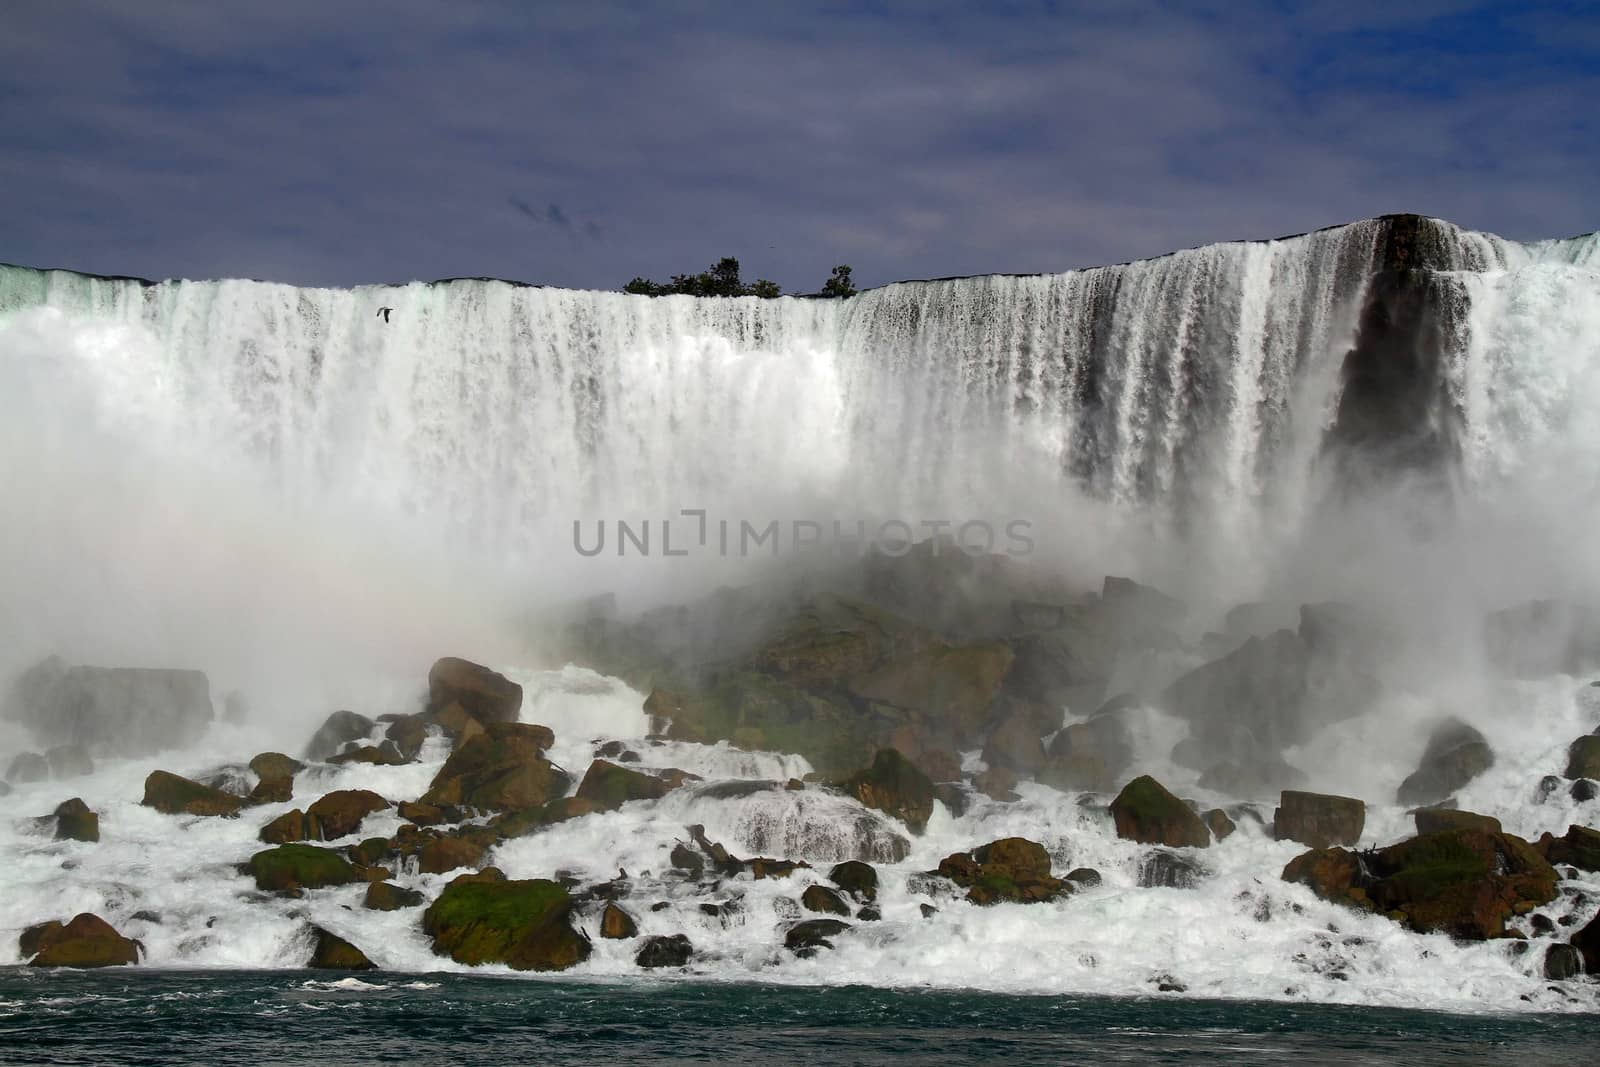 A view of Niagara Falls from the Canadian side.